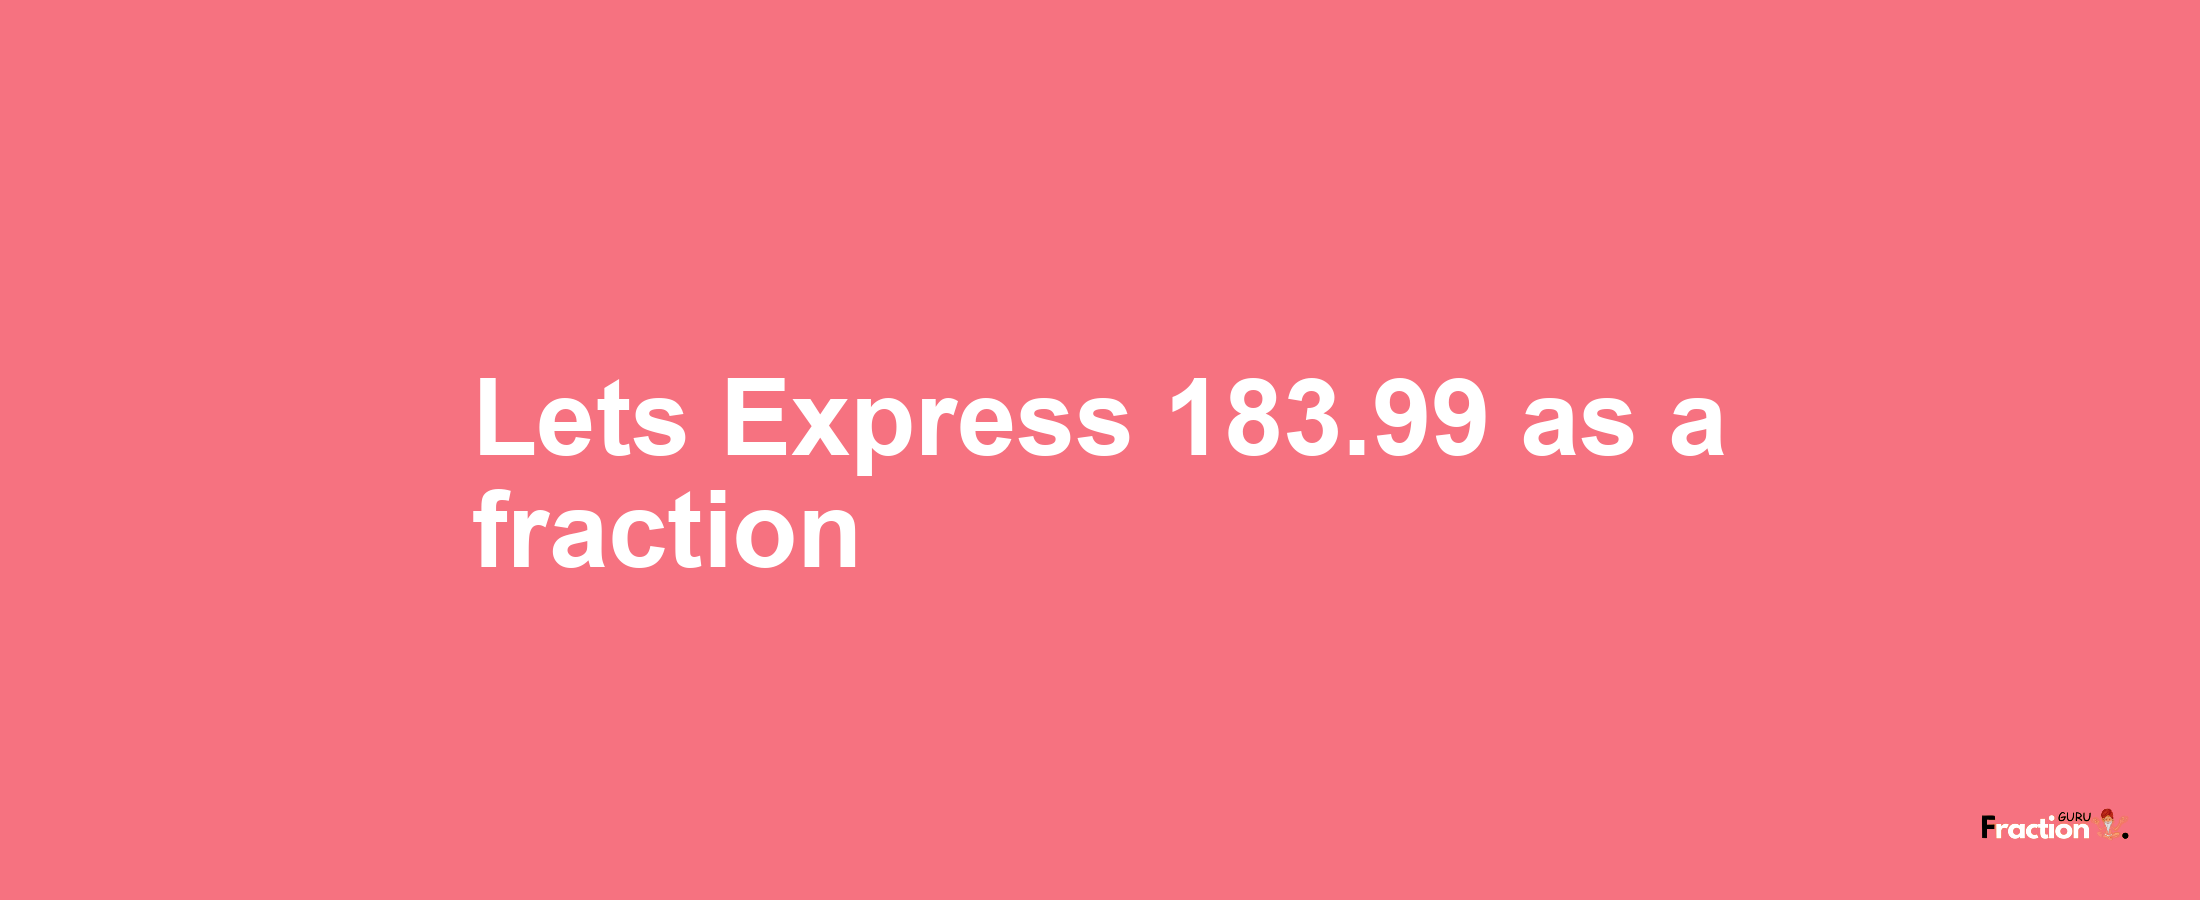 Lets Express 183.99 as afraction